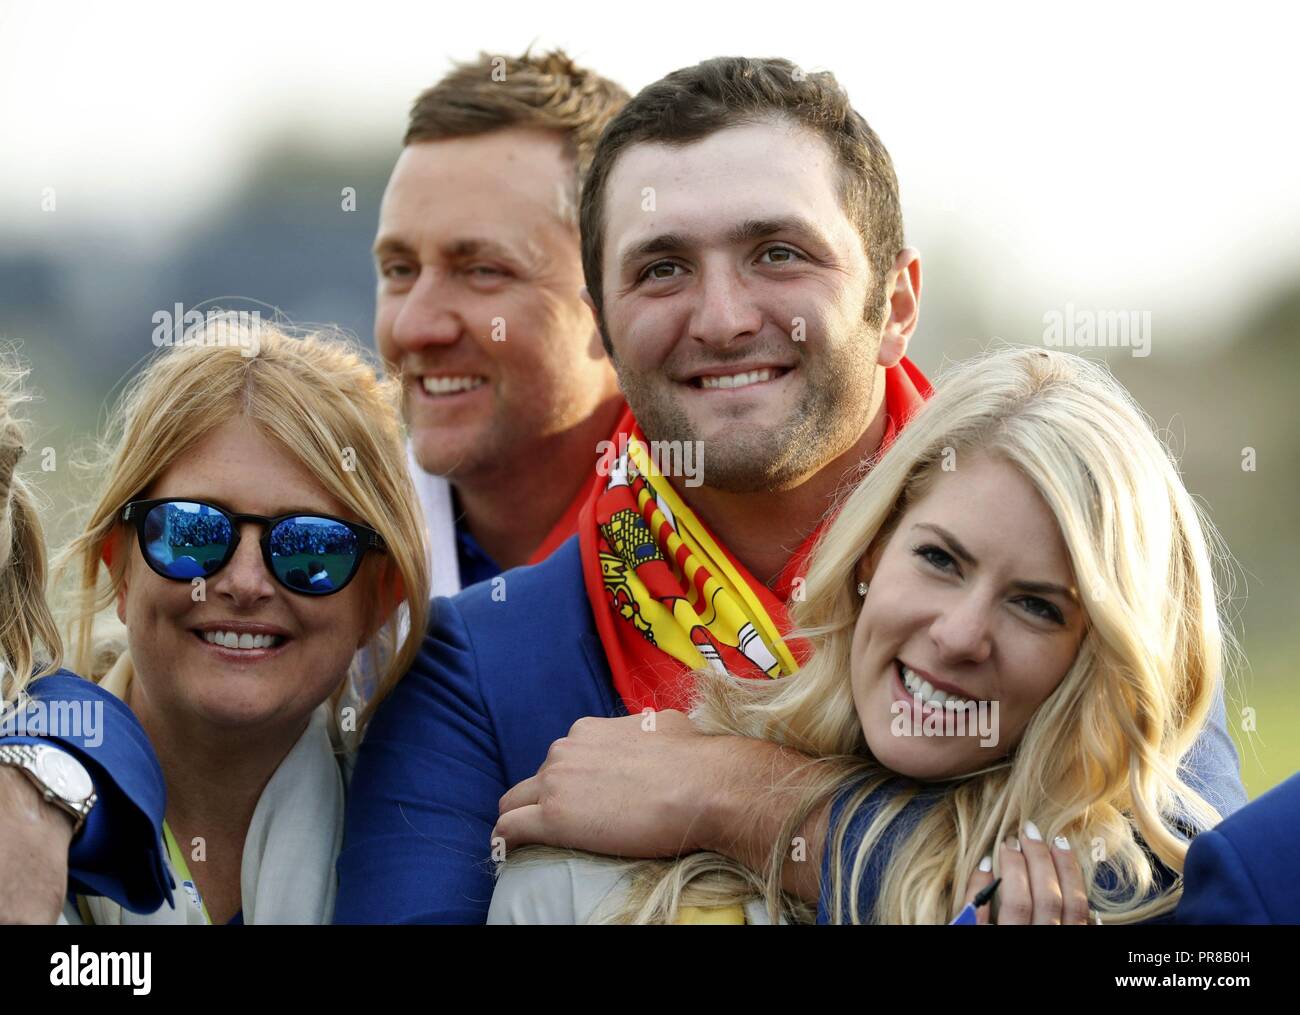 Guyancourt France 30th Sep 2018 Jon Rahm 2 R Of Spain Celebrates With His Girlfriend Kelley Cahill R After Europe Team Win On The Final Day Of The Ryder Cup 2018 At The